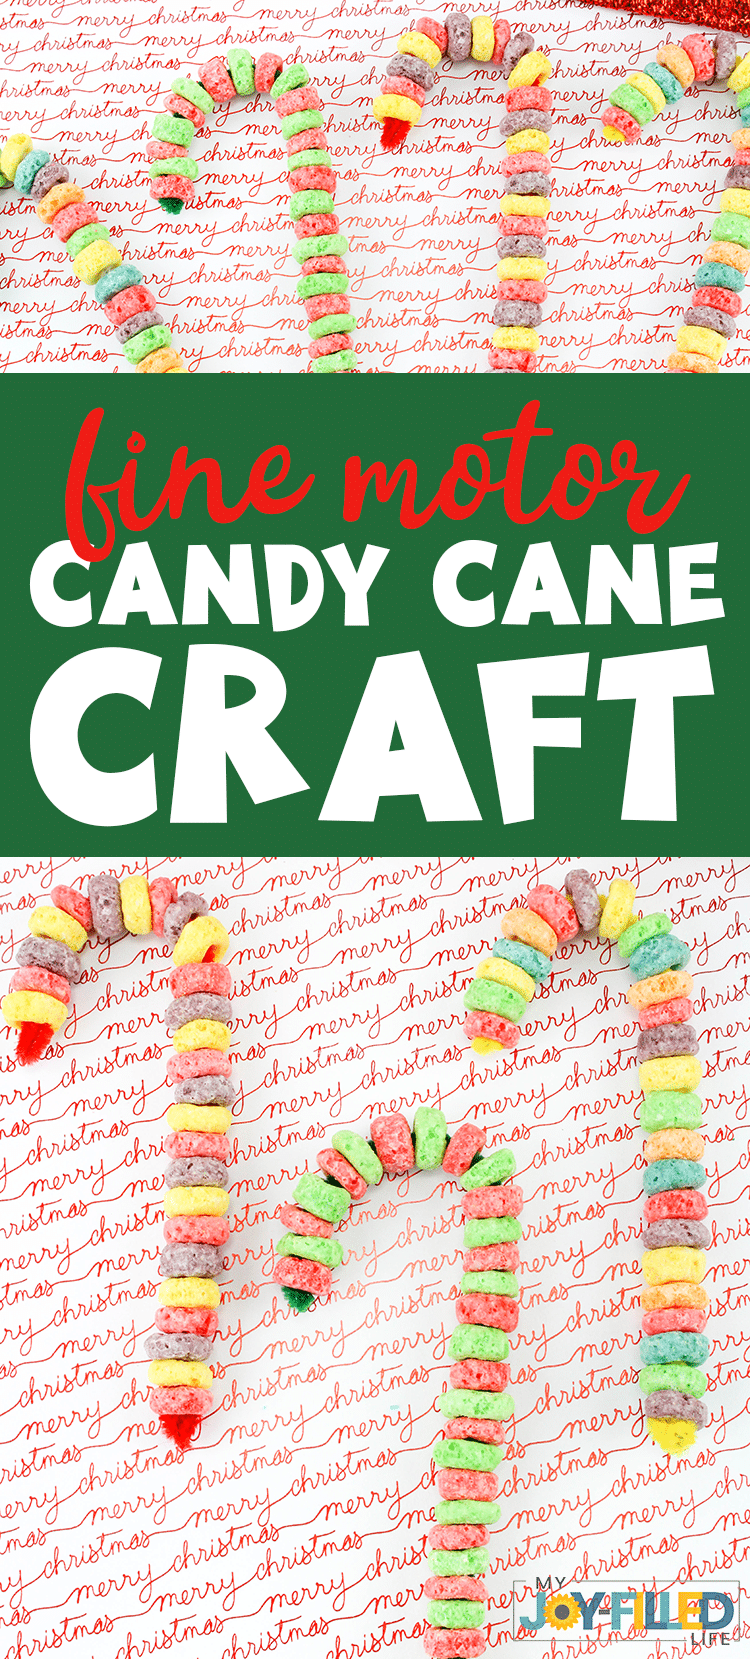 This fine motor candy cane craft is a great Christmas activity for little ones. They make for great ornaments or gifts too! #Christmascraft #homemadeornaments #christmasornaments #finemotor #finemotorskills